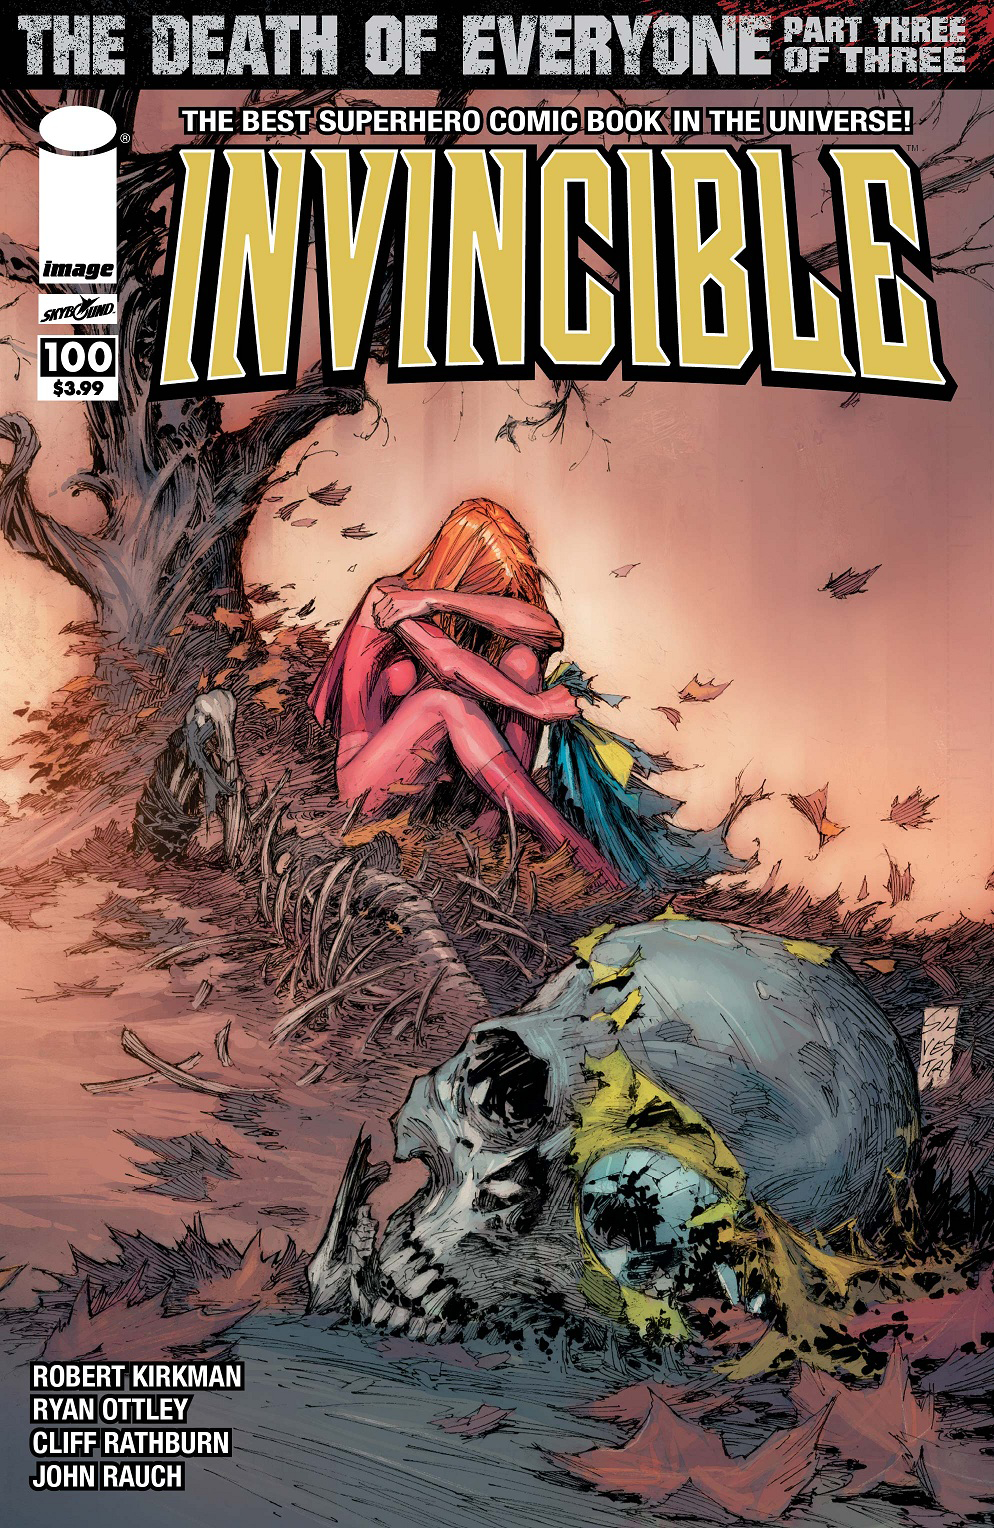 Invincible 20th Anniversary Collectible Art Poster #1 - CVR #100A